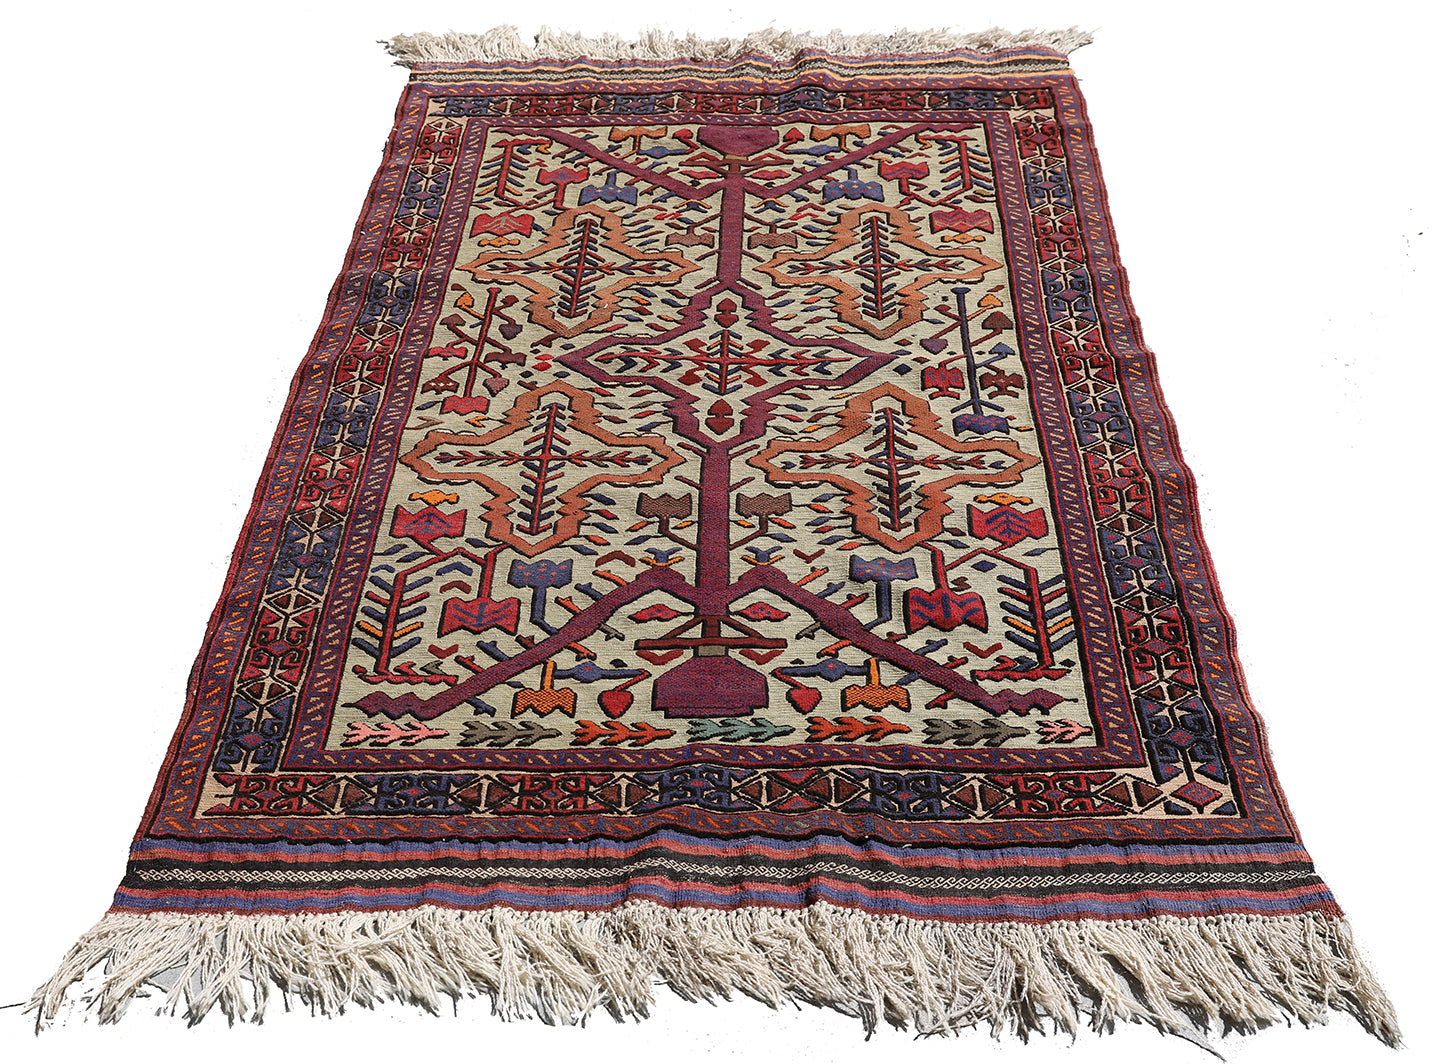 4'x5' Afghan Tribal Soumak and Knotted High Low 100% Wool Rug